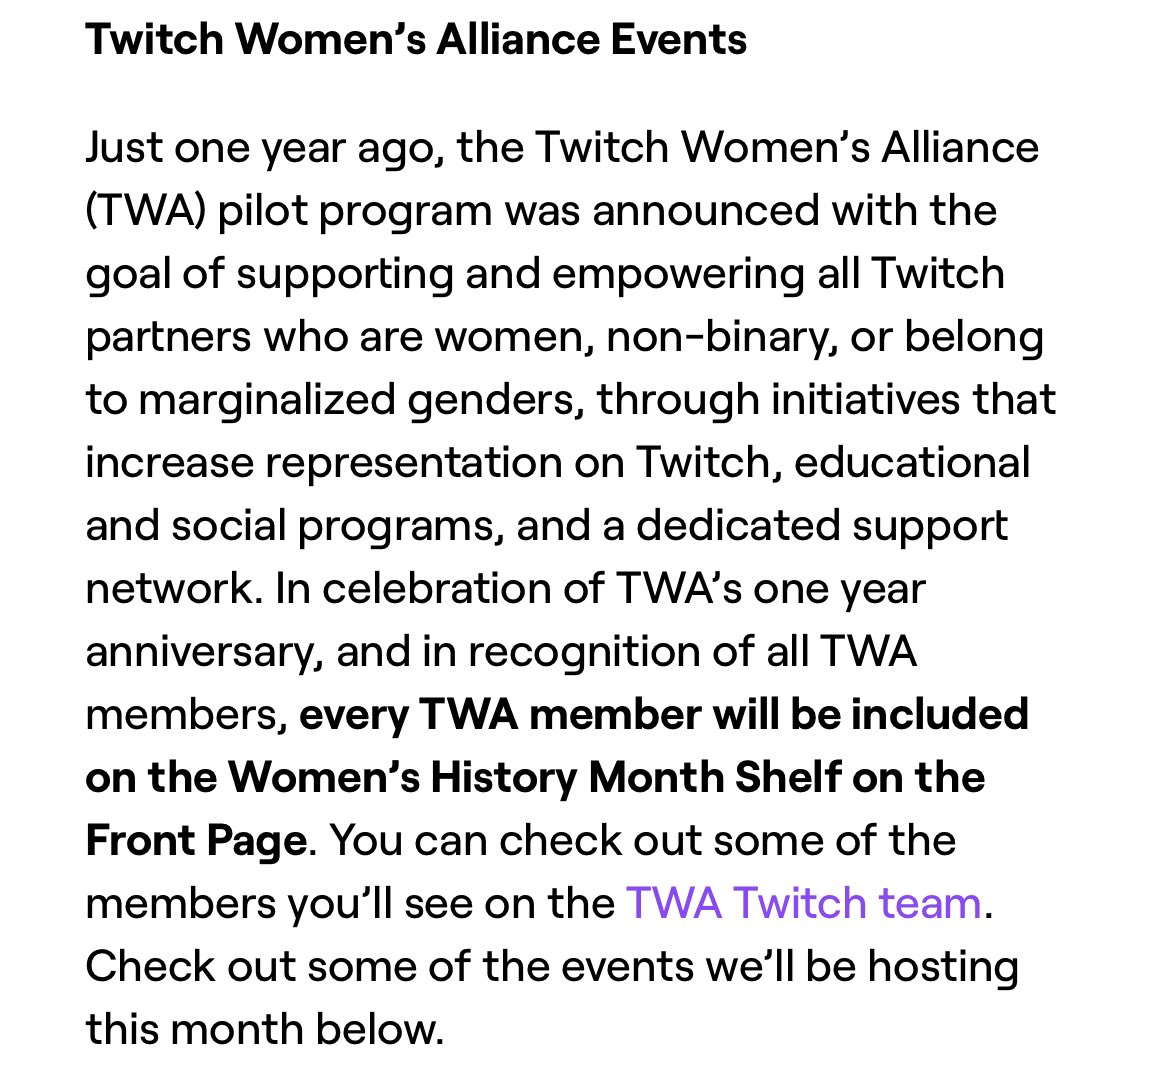 Hey @Twitch ! While there are non-binary people who don’t mind being lumped in with women, “non-binary” is an umbrella term that is used by a vast amount of identities and alignments. I understand the goal it to help those whose streaming experience may be